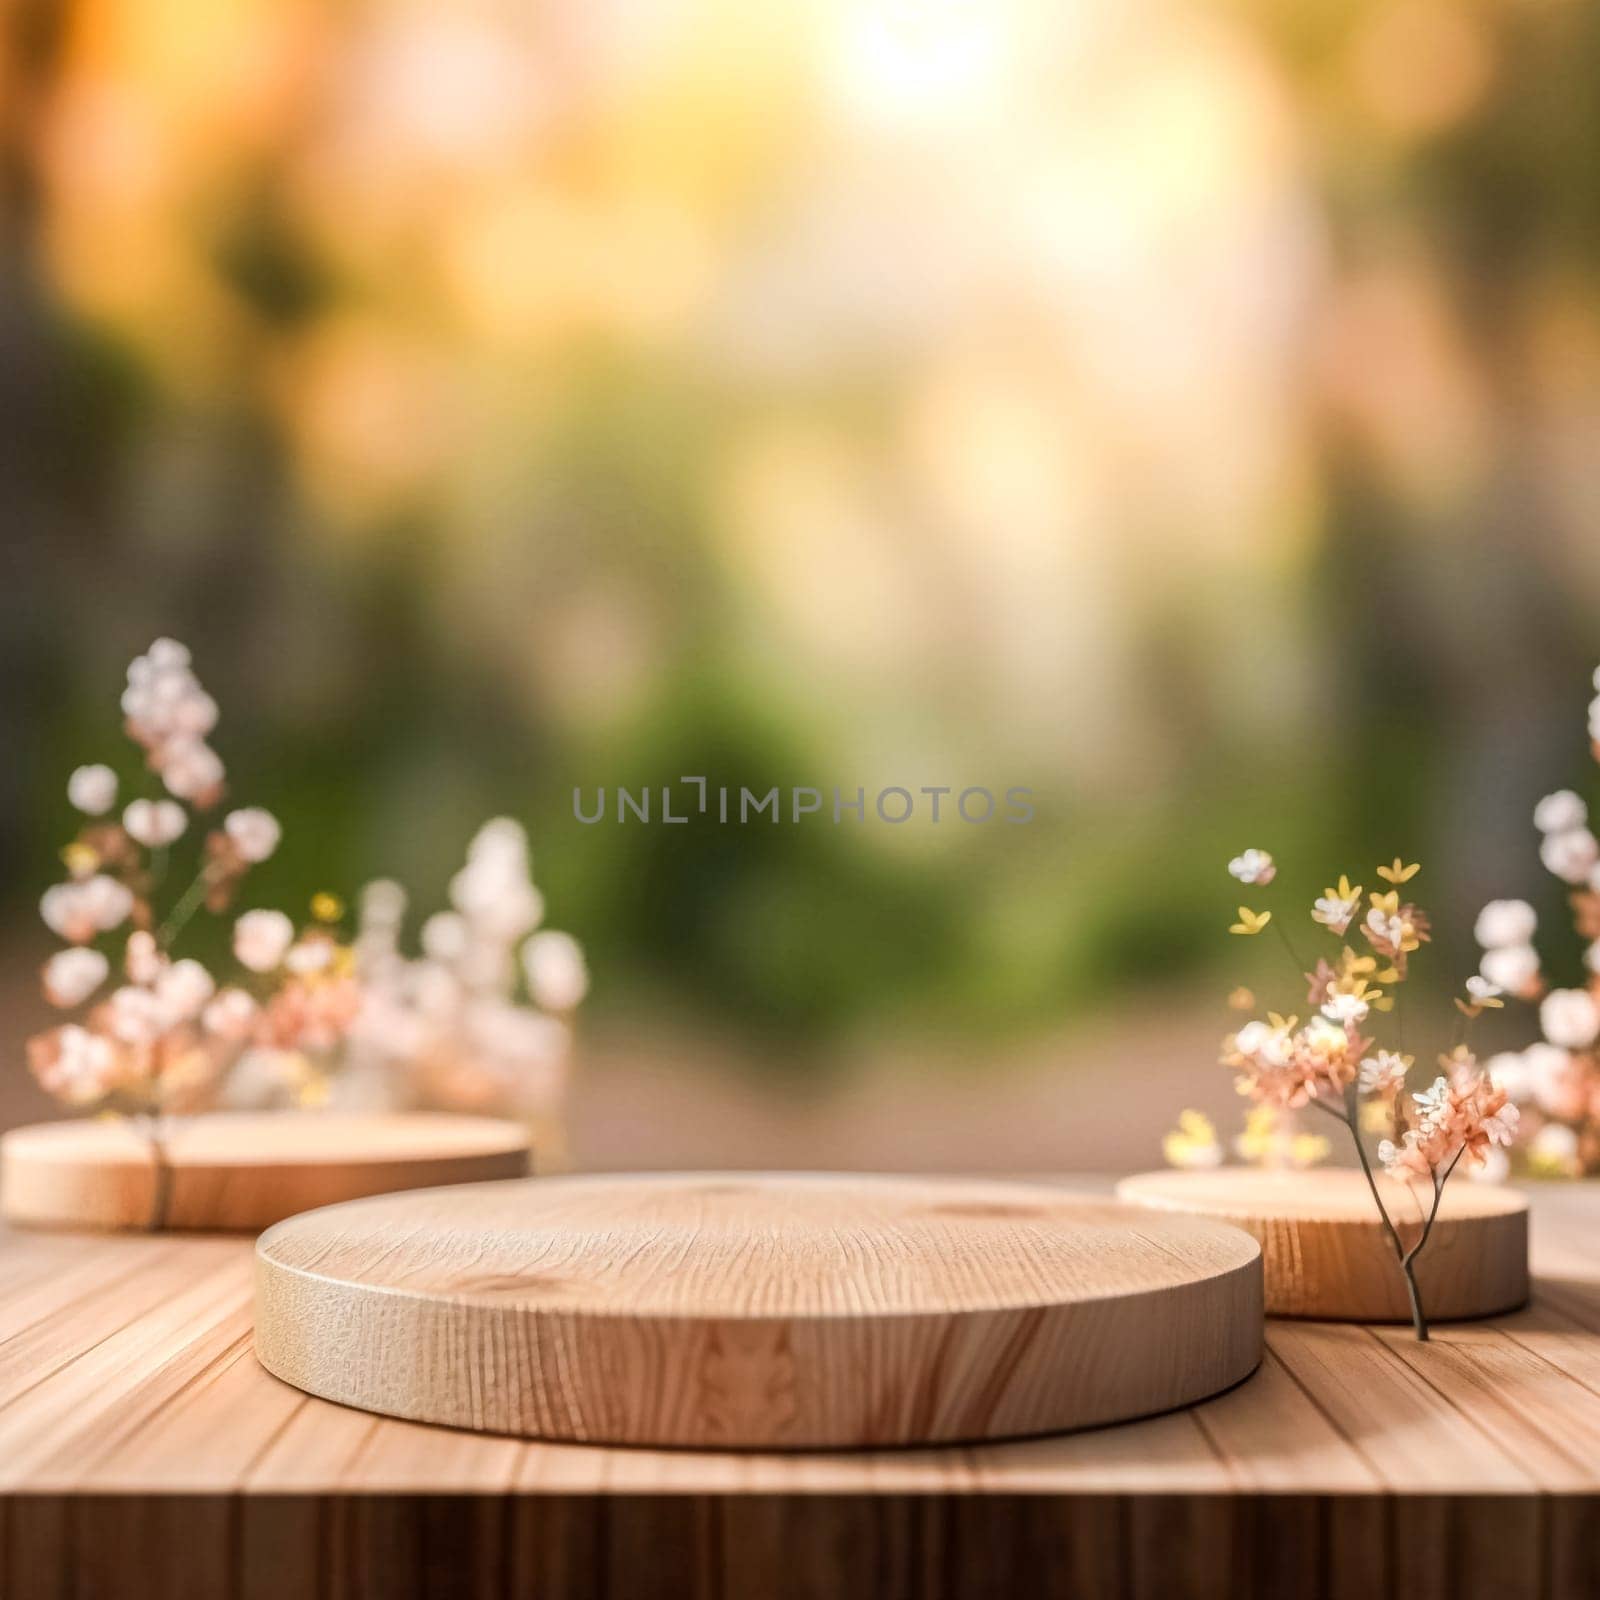 Wooden podium in a tropical forest standard illustration for product presentation against a lush green background. Natural and eco friendly concept.